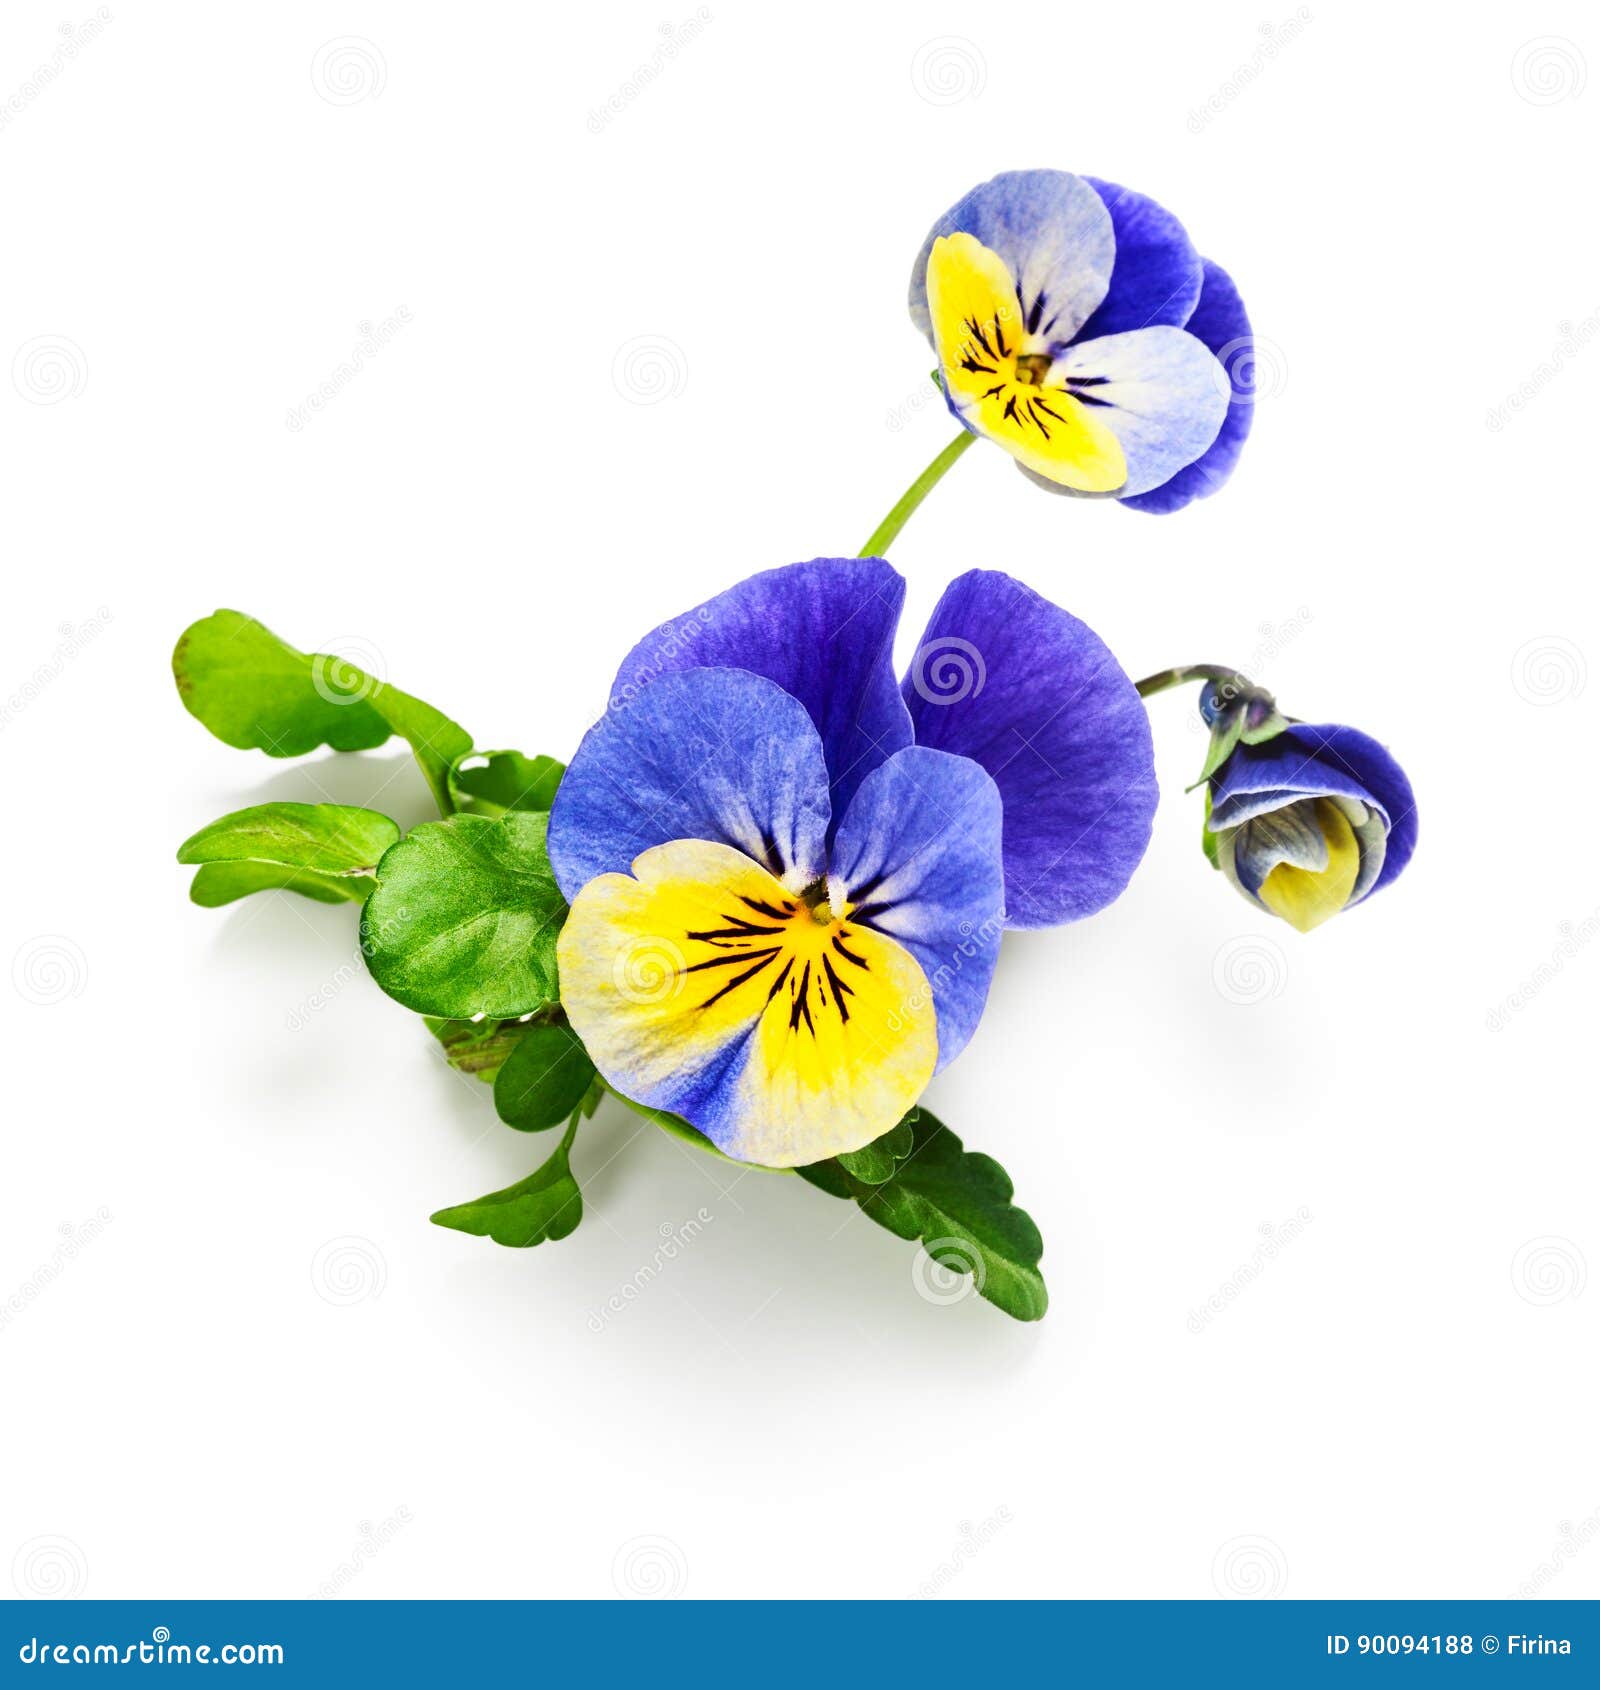 Pansy flower stock photo. Image of green, leaf, romance - 90094188